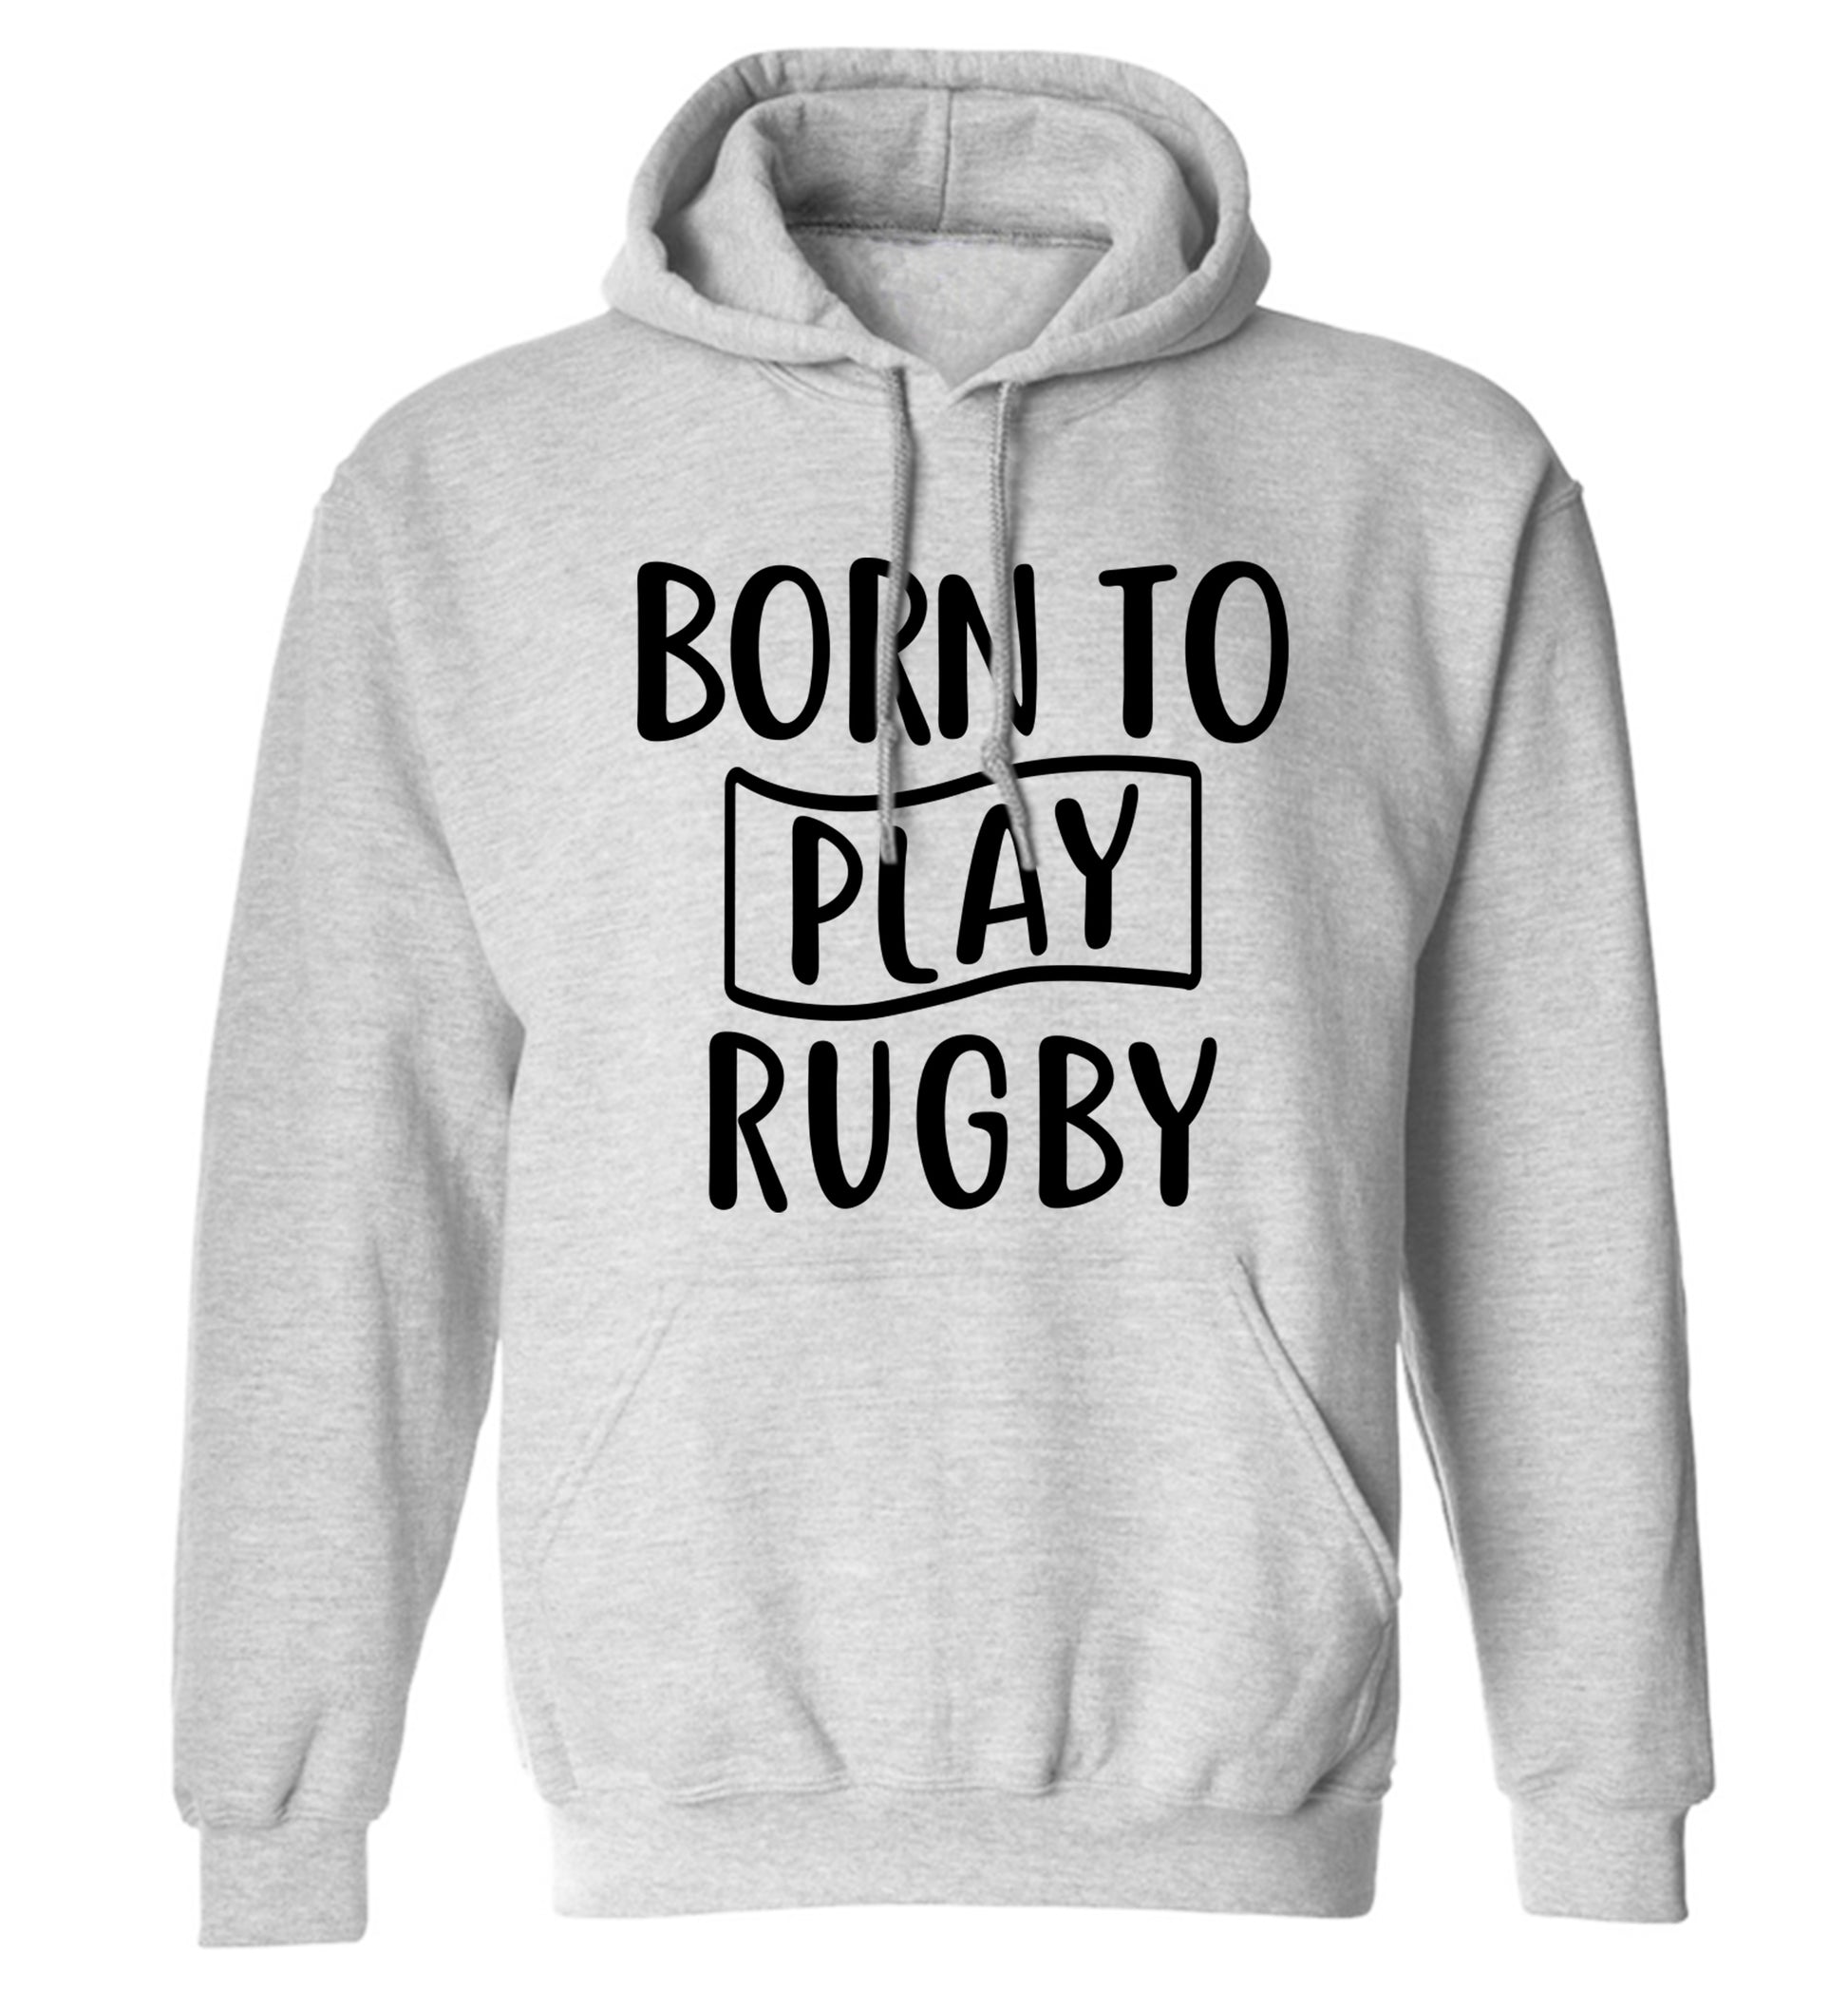 Born to play rugby adults unisex grey hoodie 2XL